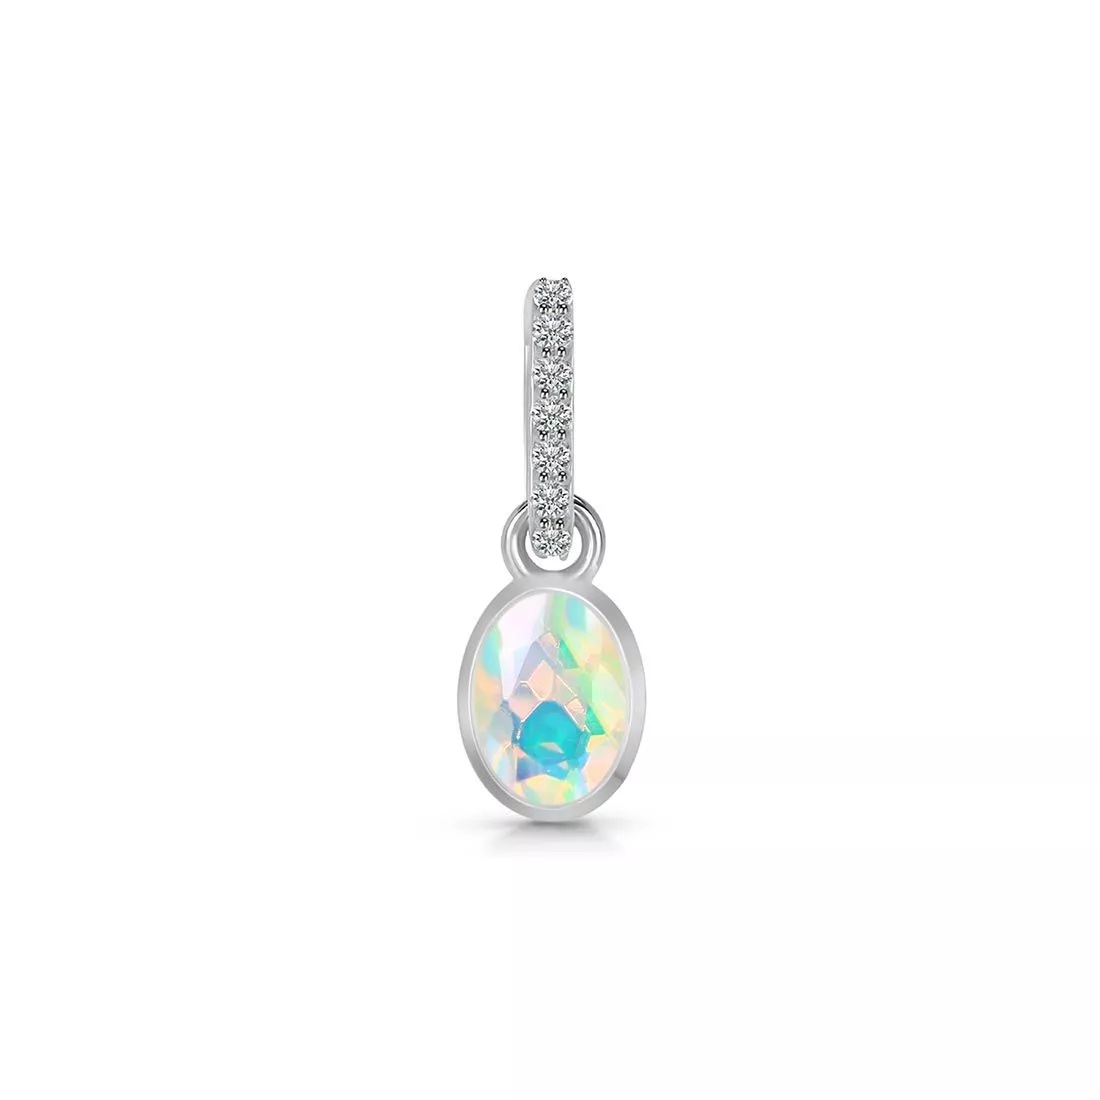 Nurture your life with these Opal Jewelry